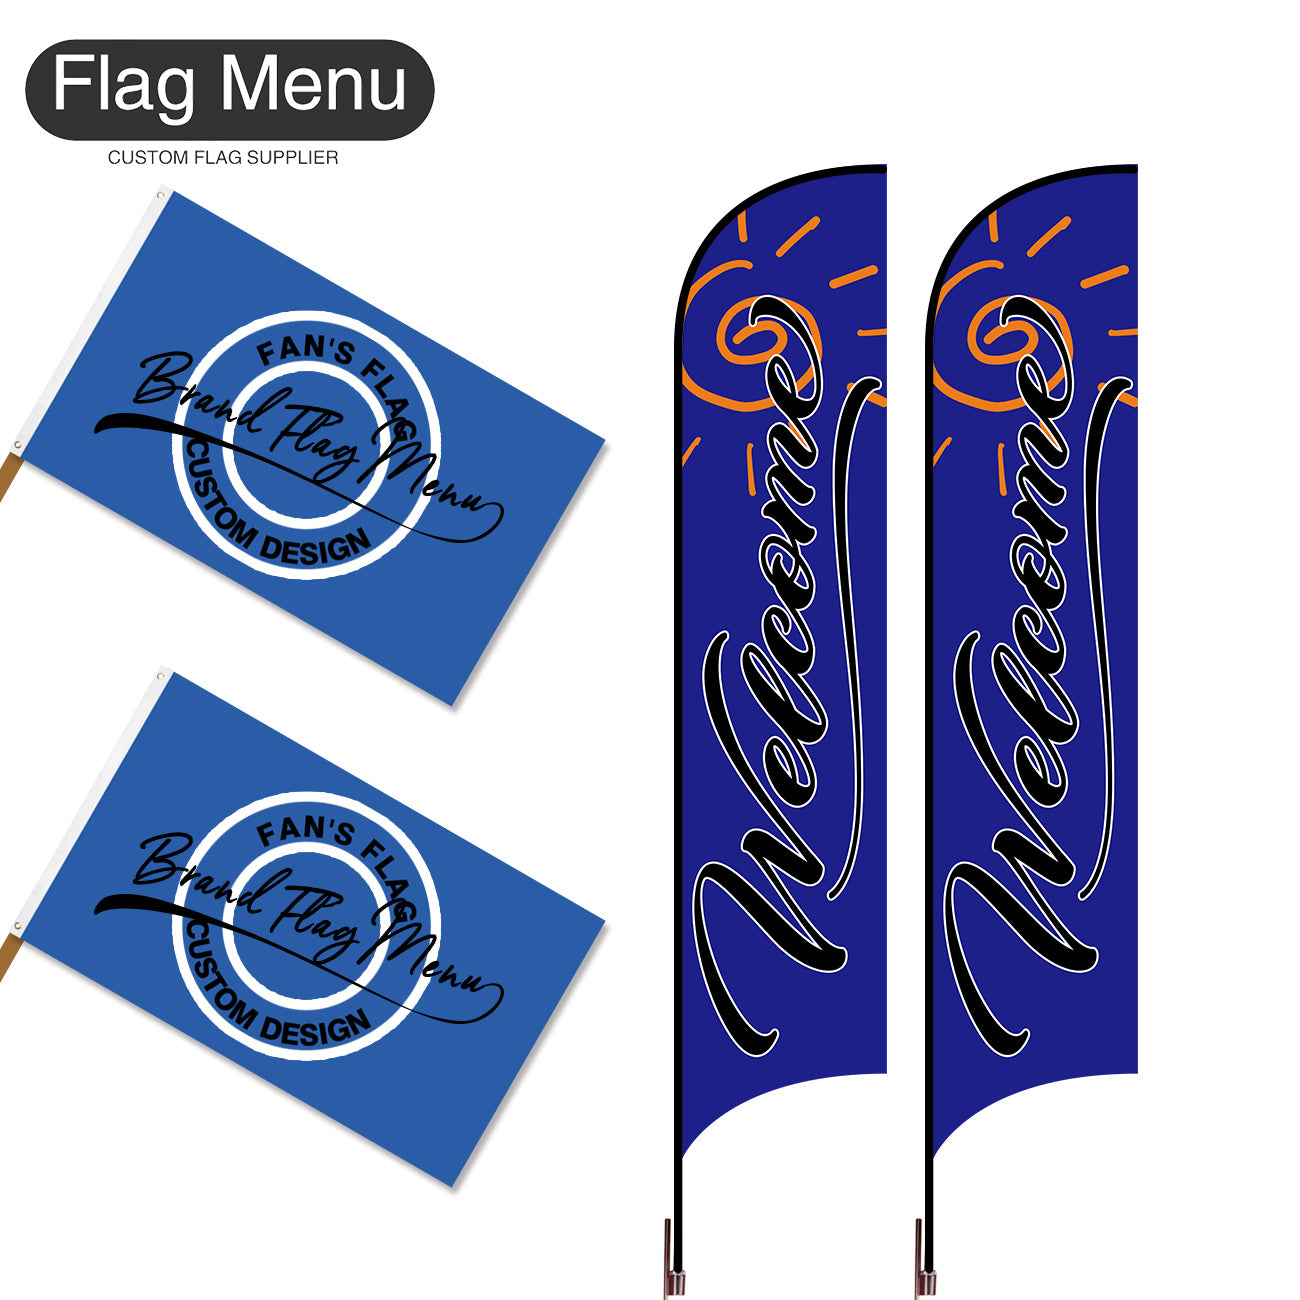 Outdoor Advertising Set - D-Blue C-S - Feather Flag -Double Sided & 3'x5' Regular Flag -Single Sided-Cross & Water Bag-Flag Menu